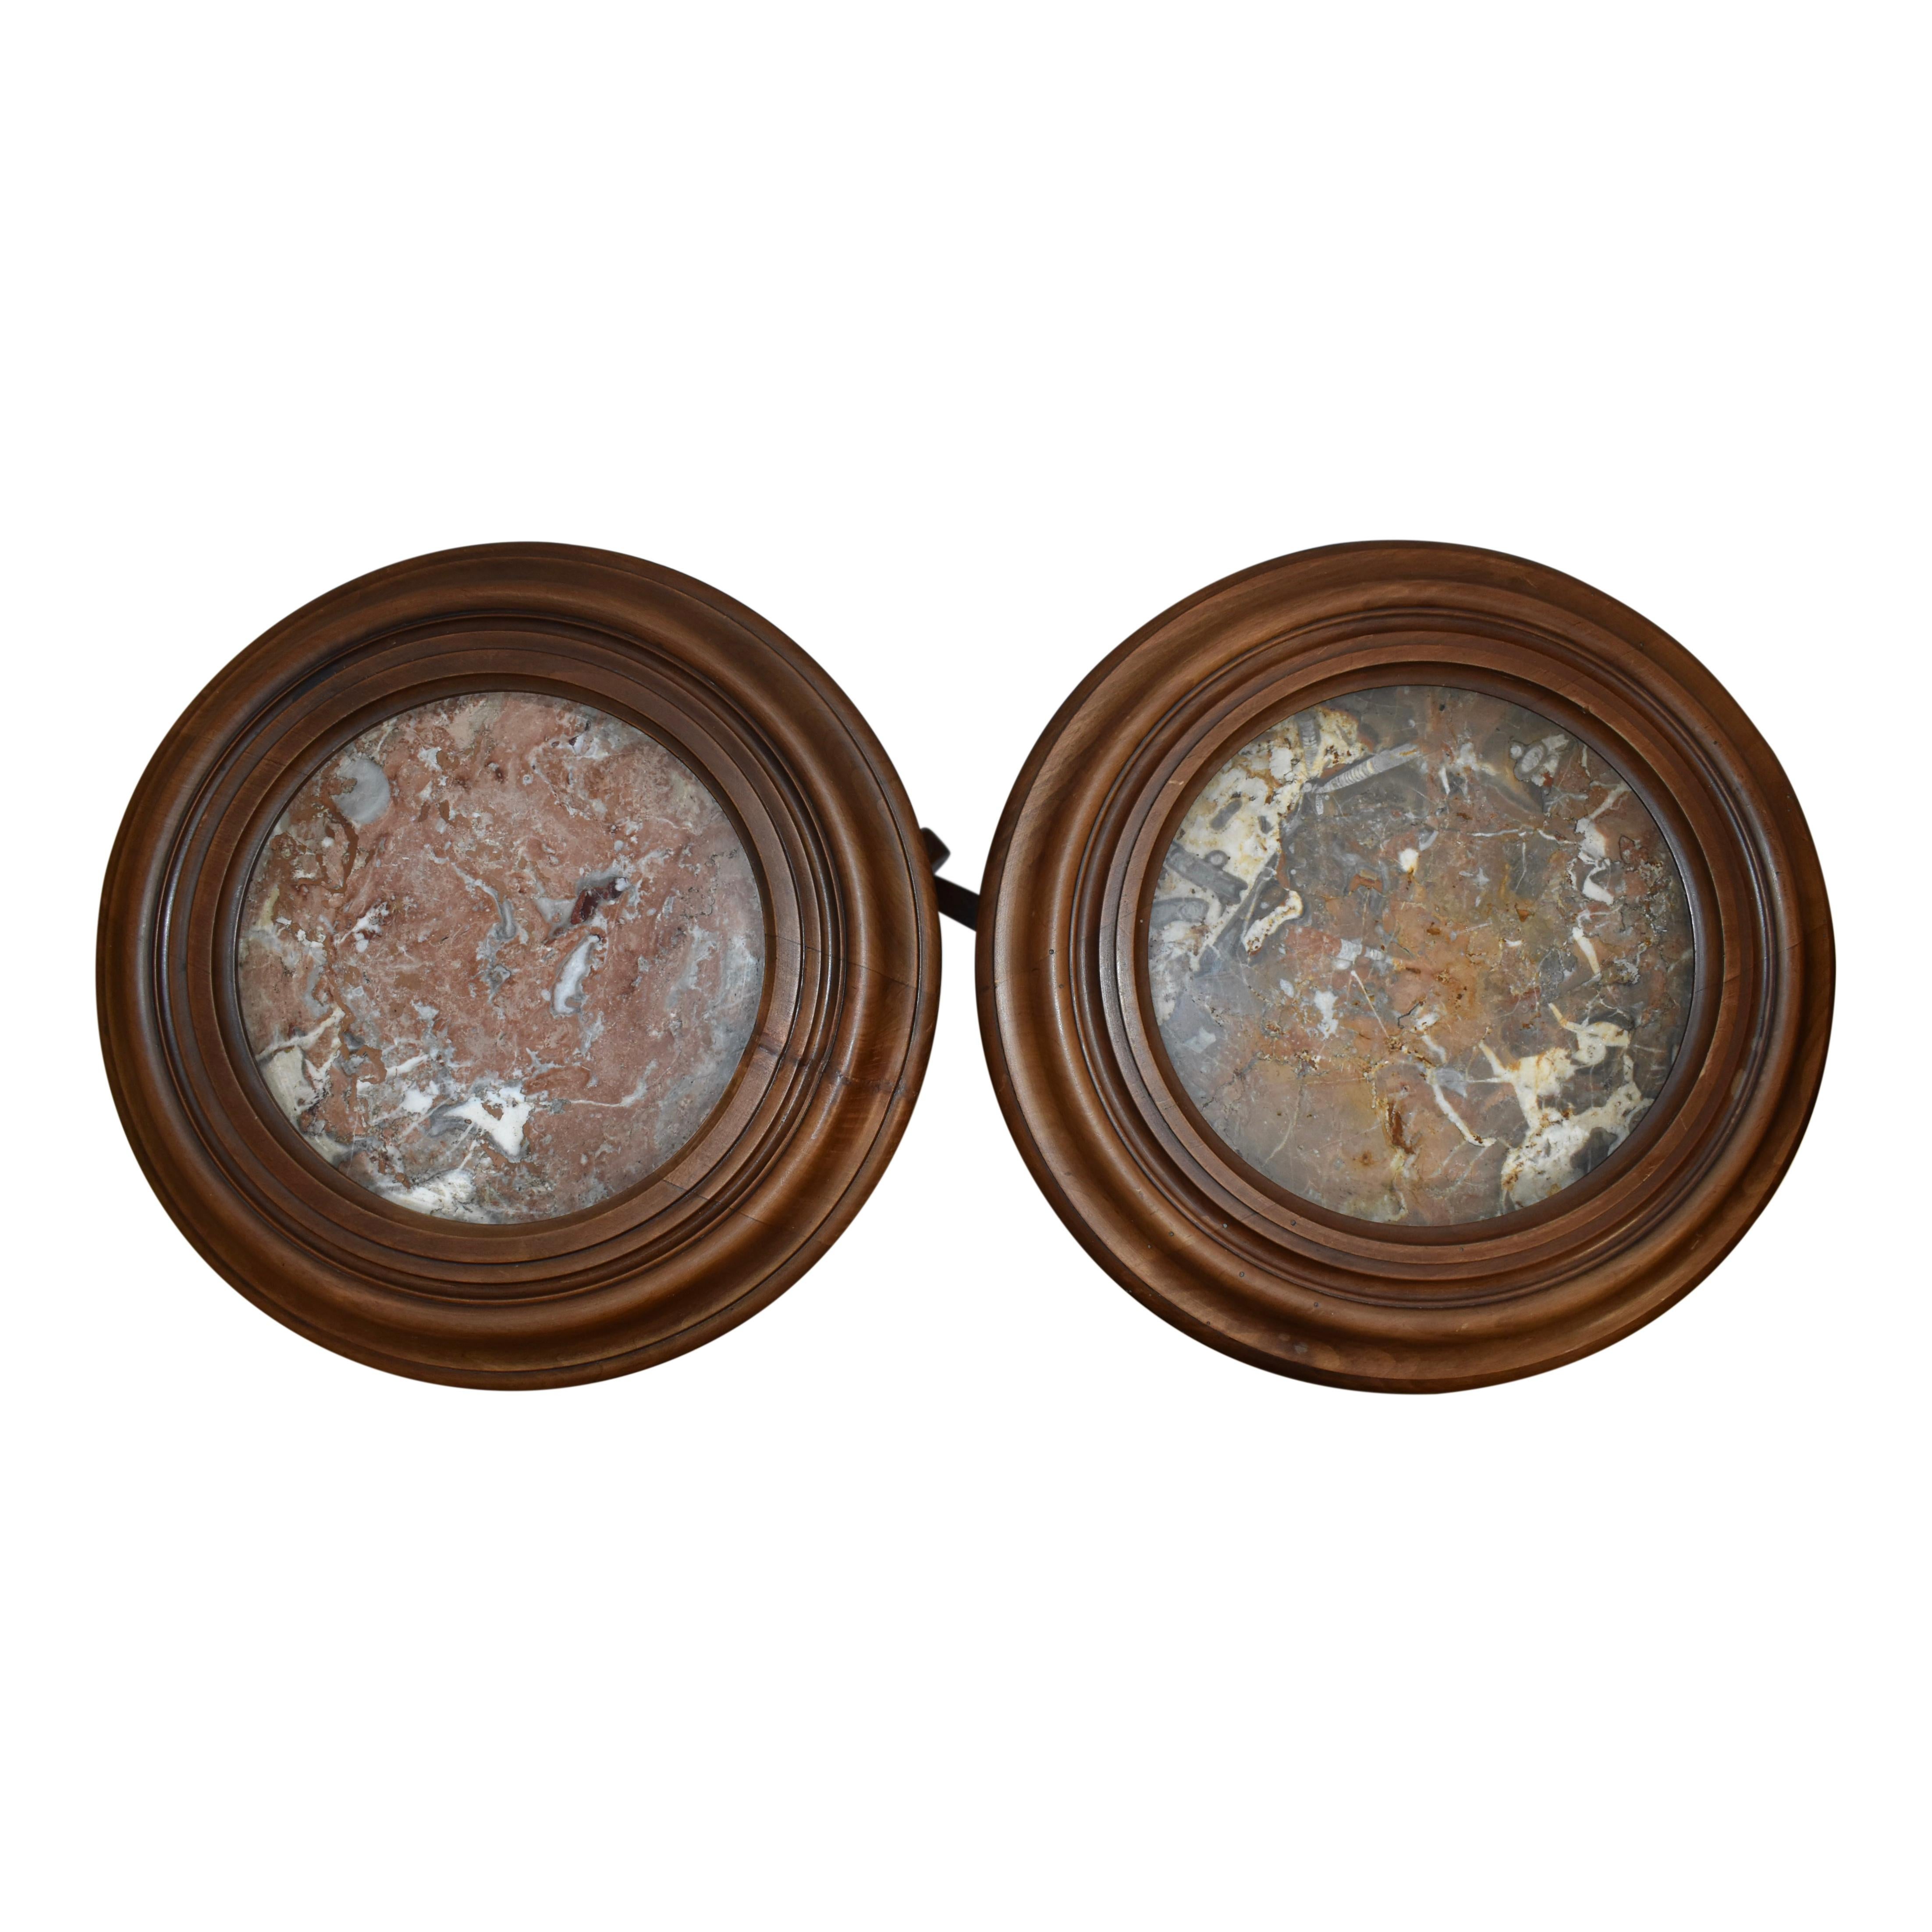 French Mahogany Side Tables/Candle Stands with Marble Tops, Set of 2, circa 1900 For Sale 1